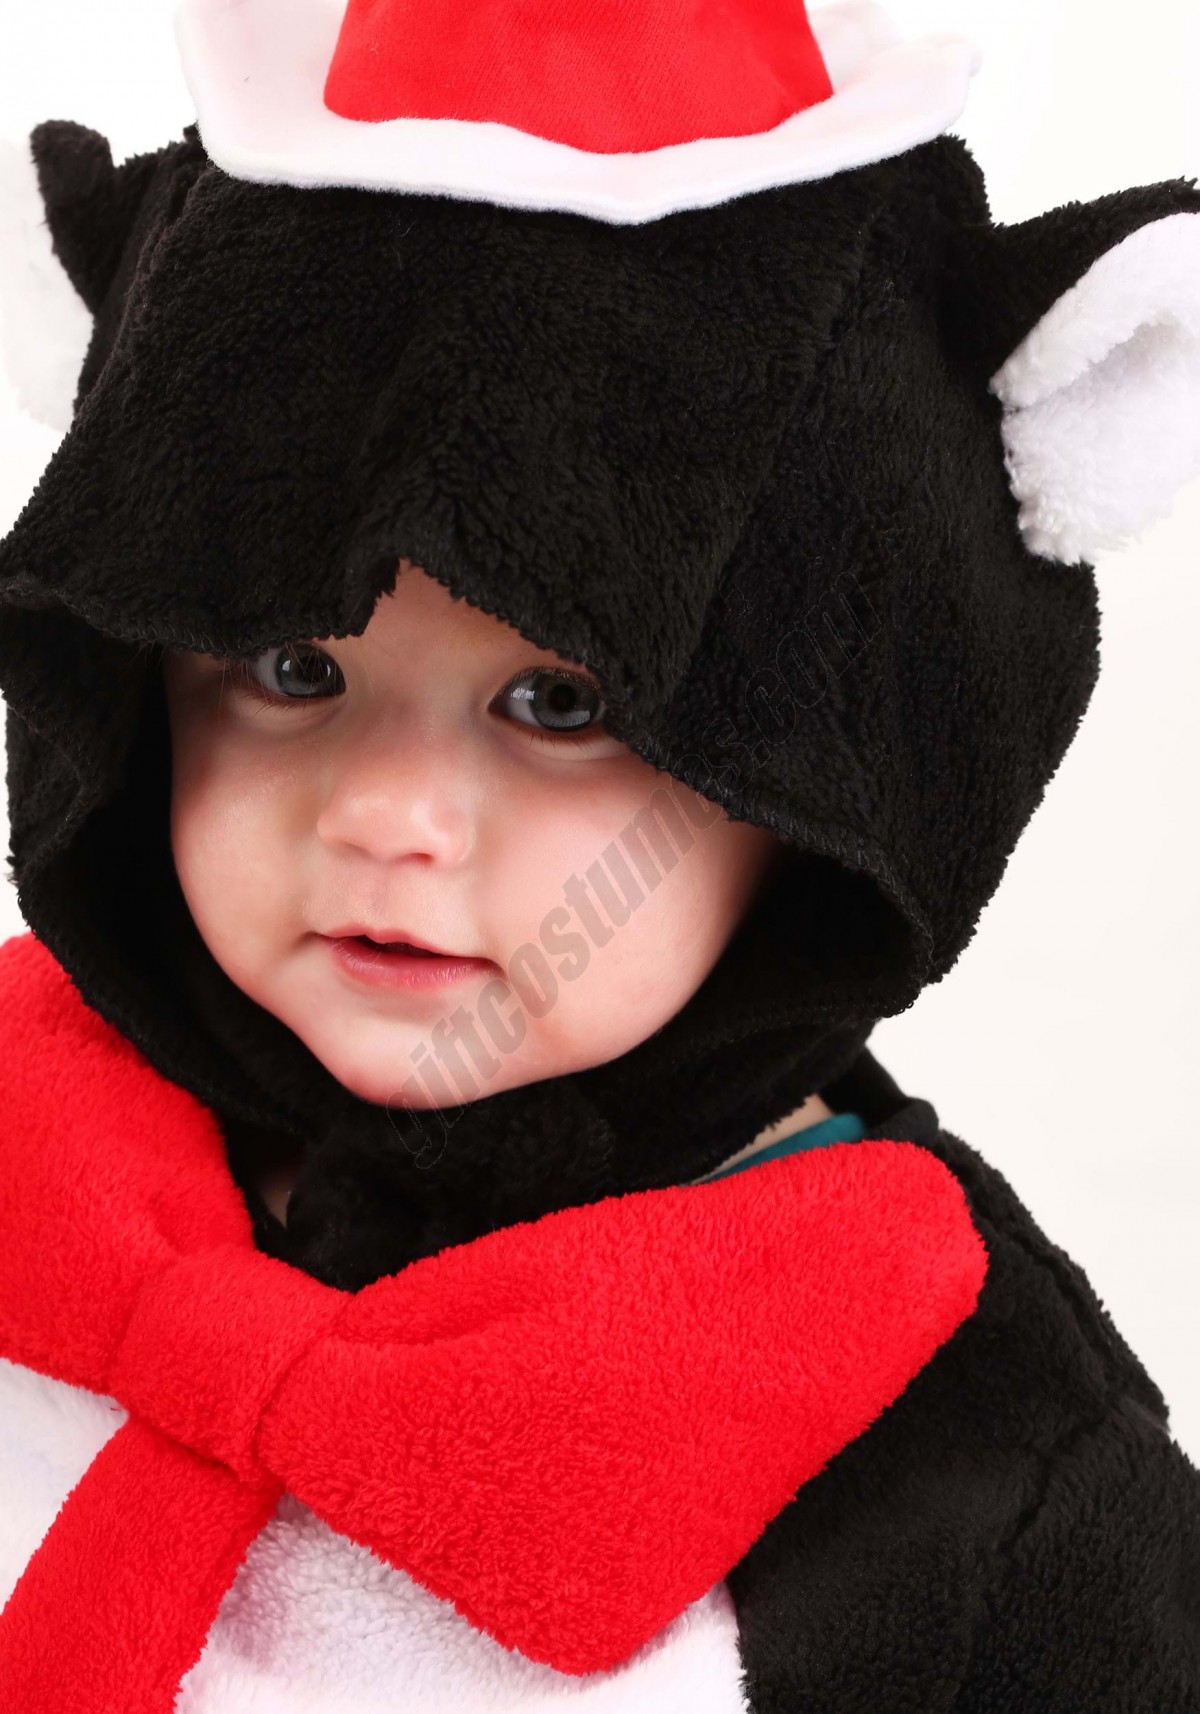 Dr. Seuss: The Cat in the Hat Deluxe Infant Costume Promotions - -3